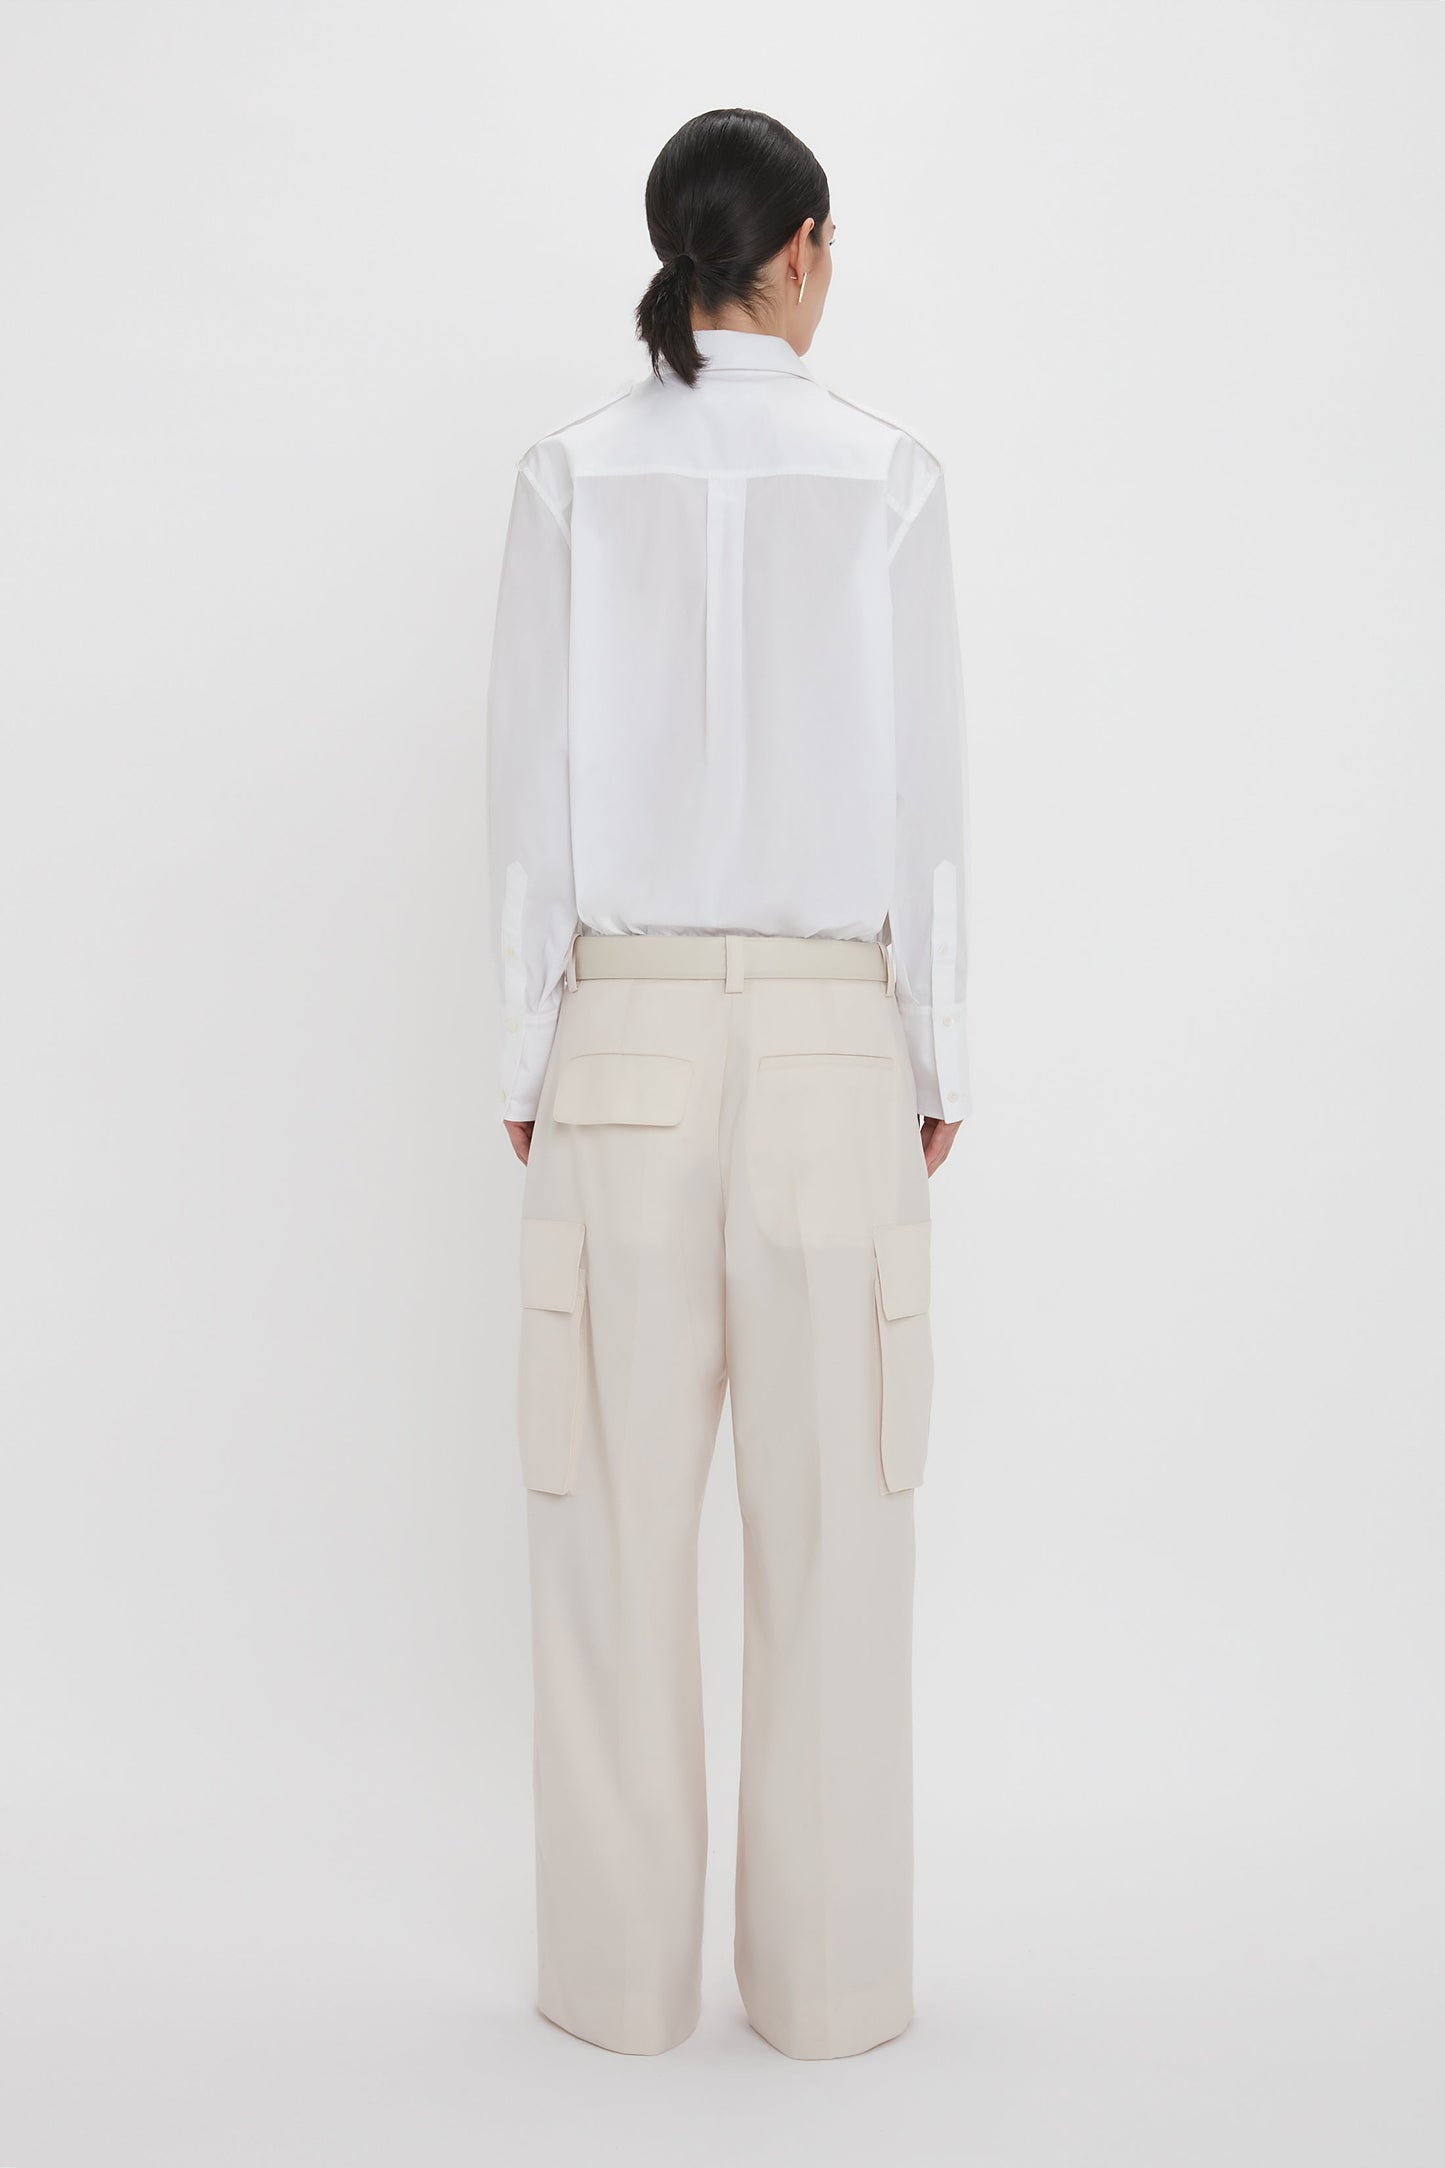 A person with dark hair wearing a white Victoria Beckham Oversized Pocket Shirt In White and cream-colored Relaxed Cargo Trouser stands facing away in a minimalistic setting.